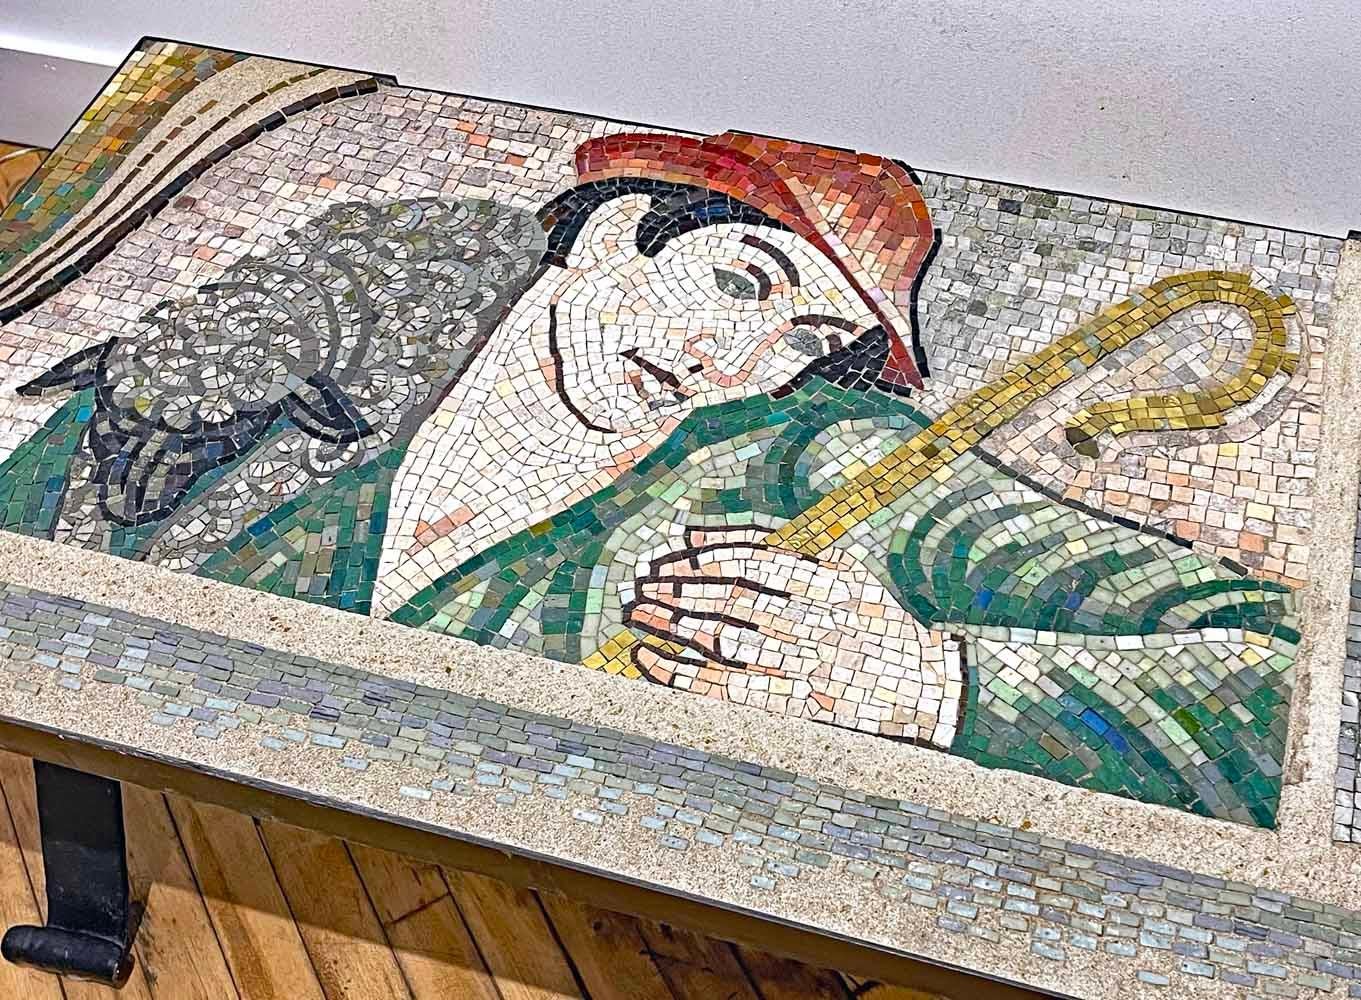 This stunning Art Deco table depicting a shepherd with a sheep over his shoulders, with a golden crook in his hand, is a tour de force of mosaic artisanry.  The artist has used tesserae in stone and glass in tones of deep red, forest green, bright